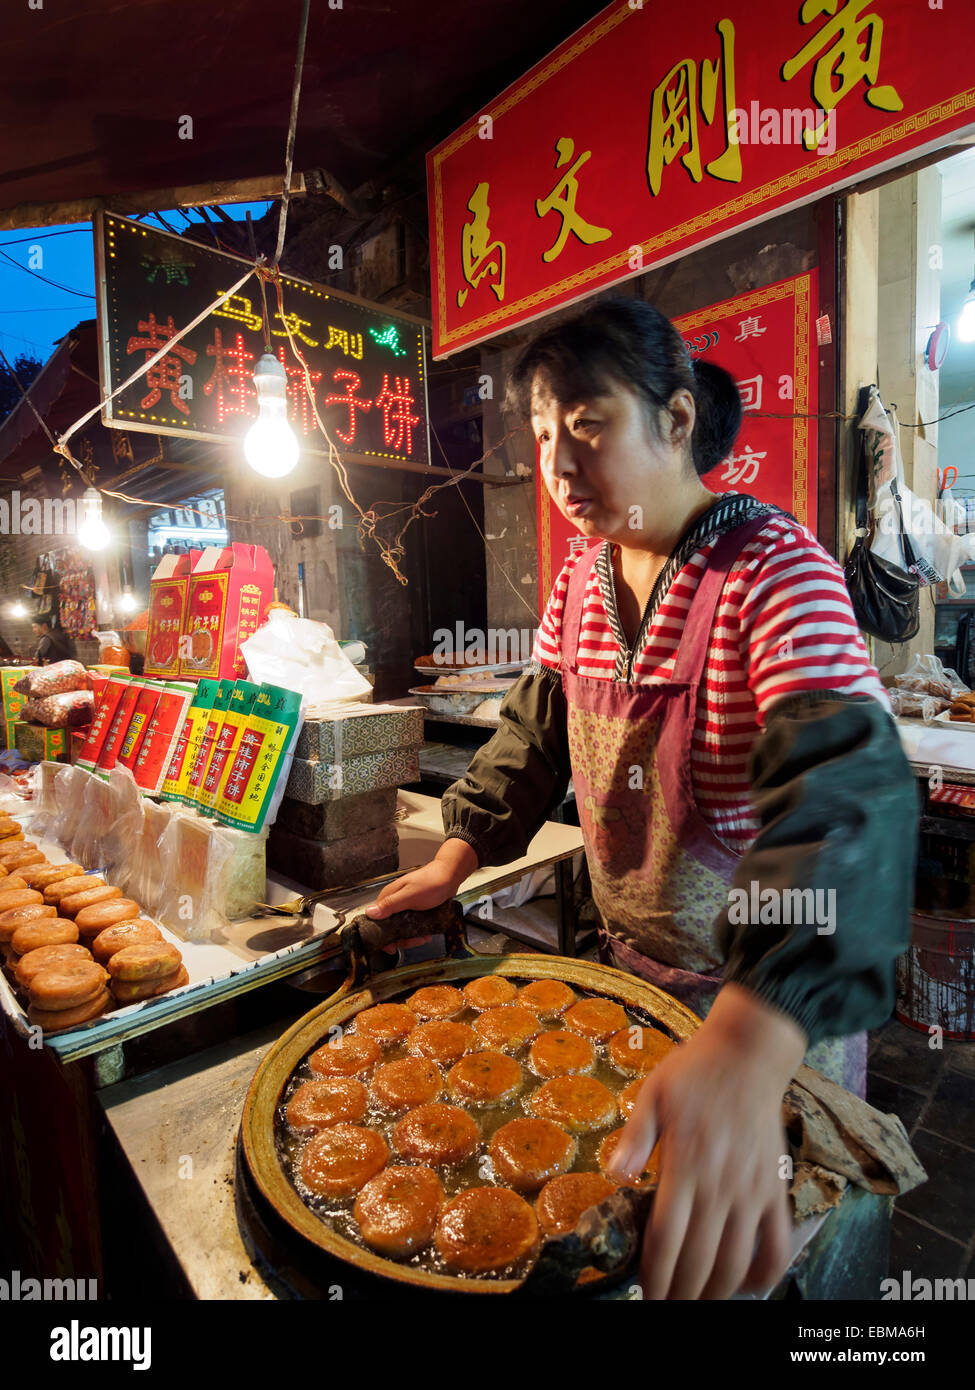 Street food stall in Muslim quarter of Xian, China, Asia Stock Photo